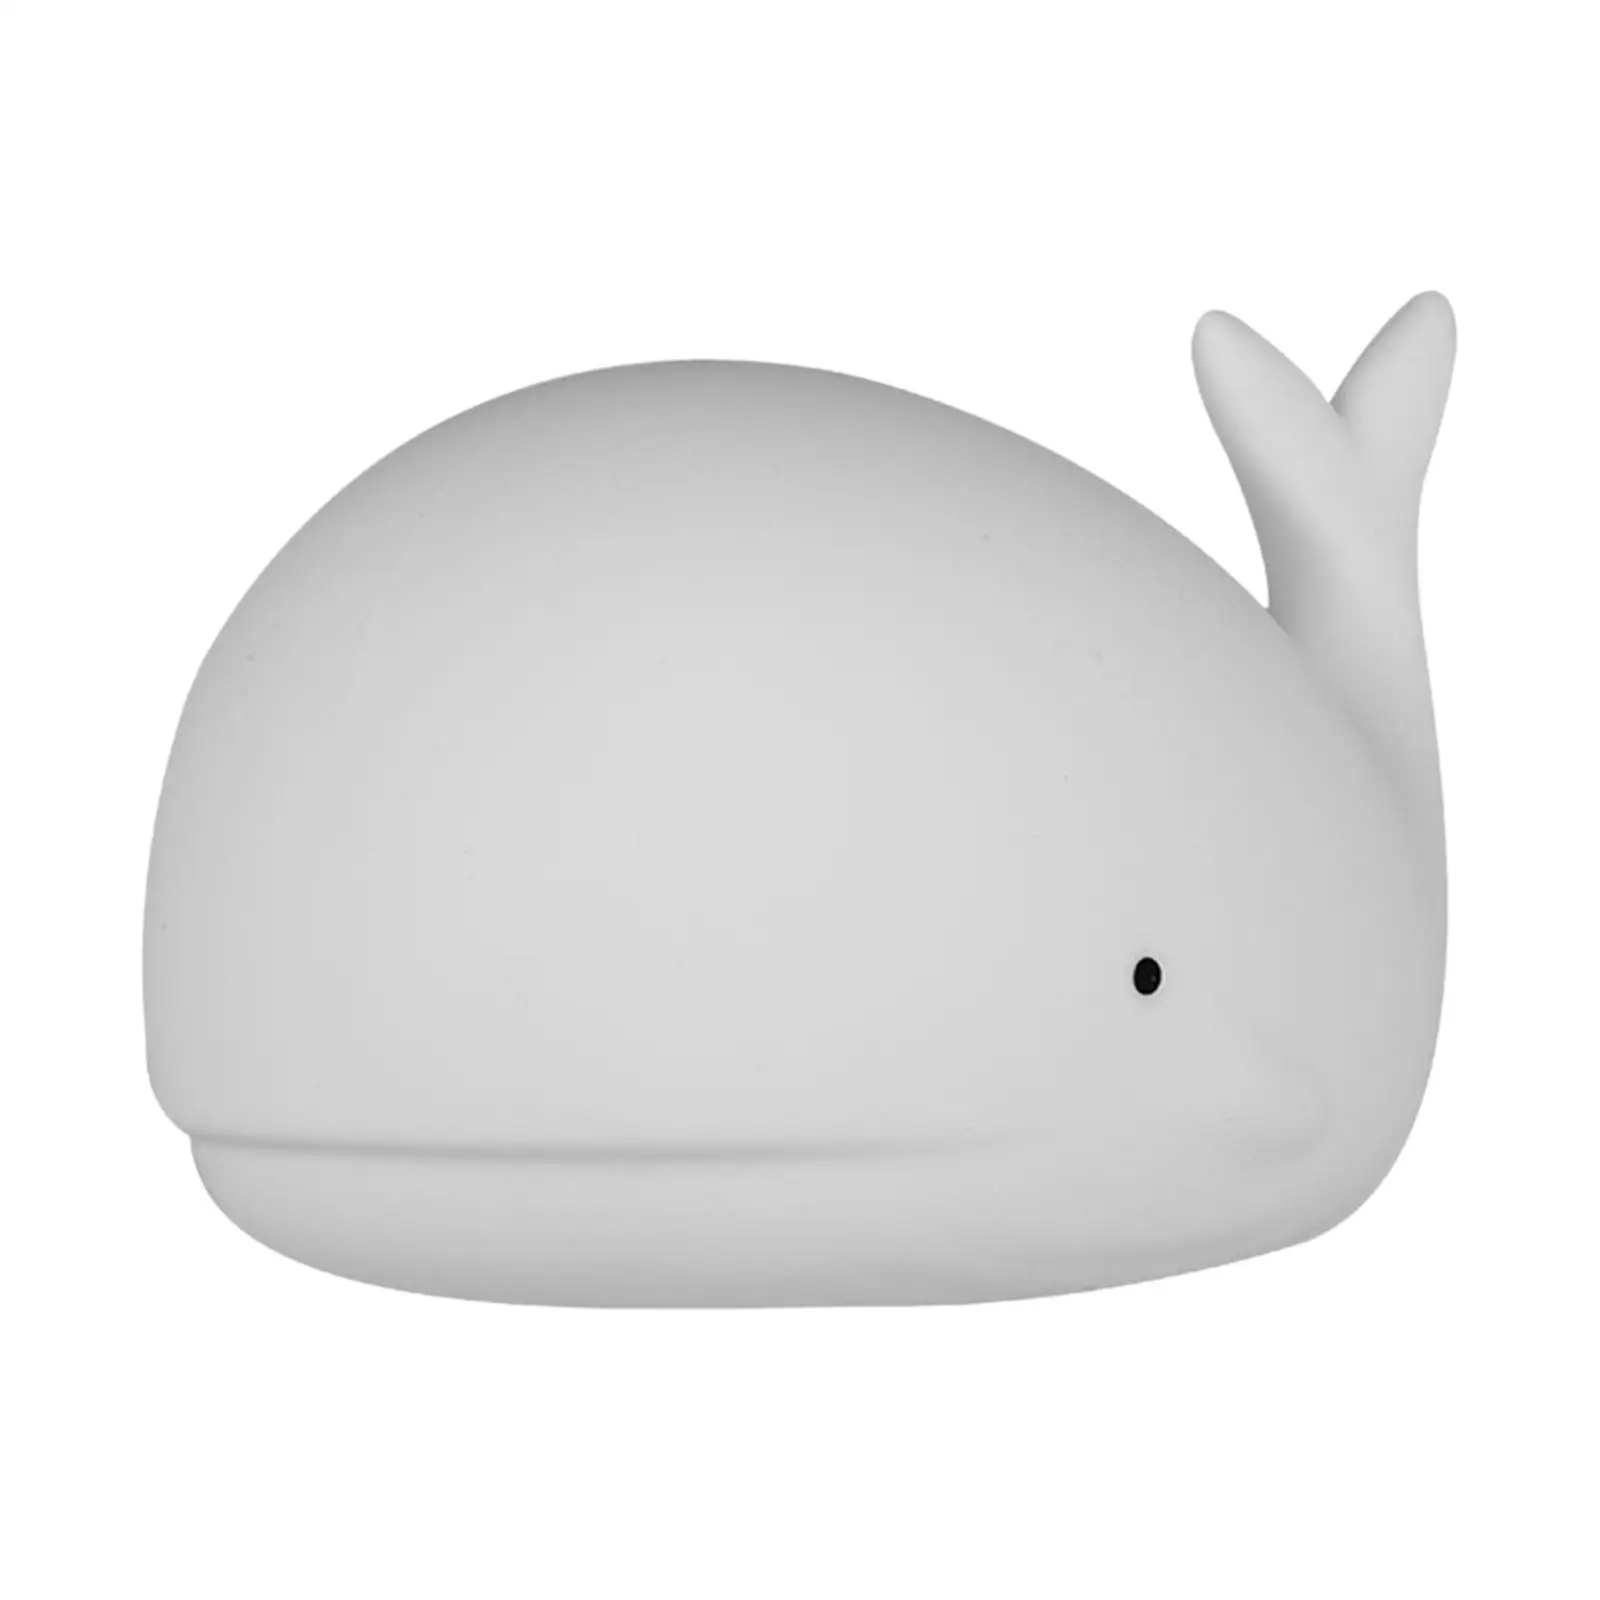 Cute Whale Night Light for Kids Tap Control Portable Lamps Silicone Rechargeable Desk Lamp for Toddler Boys Nursery Baby Bedside